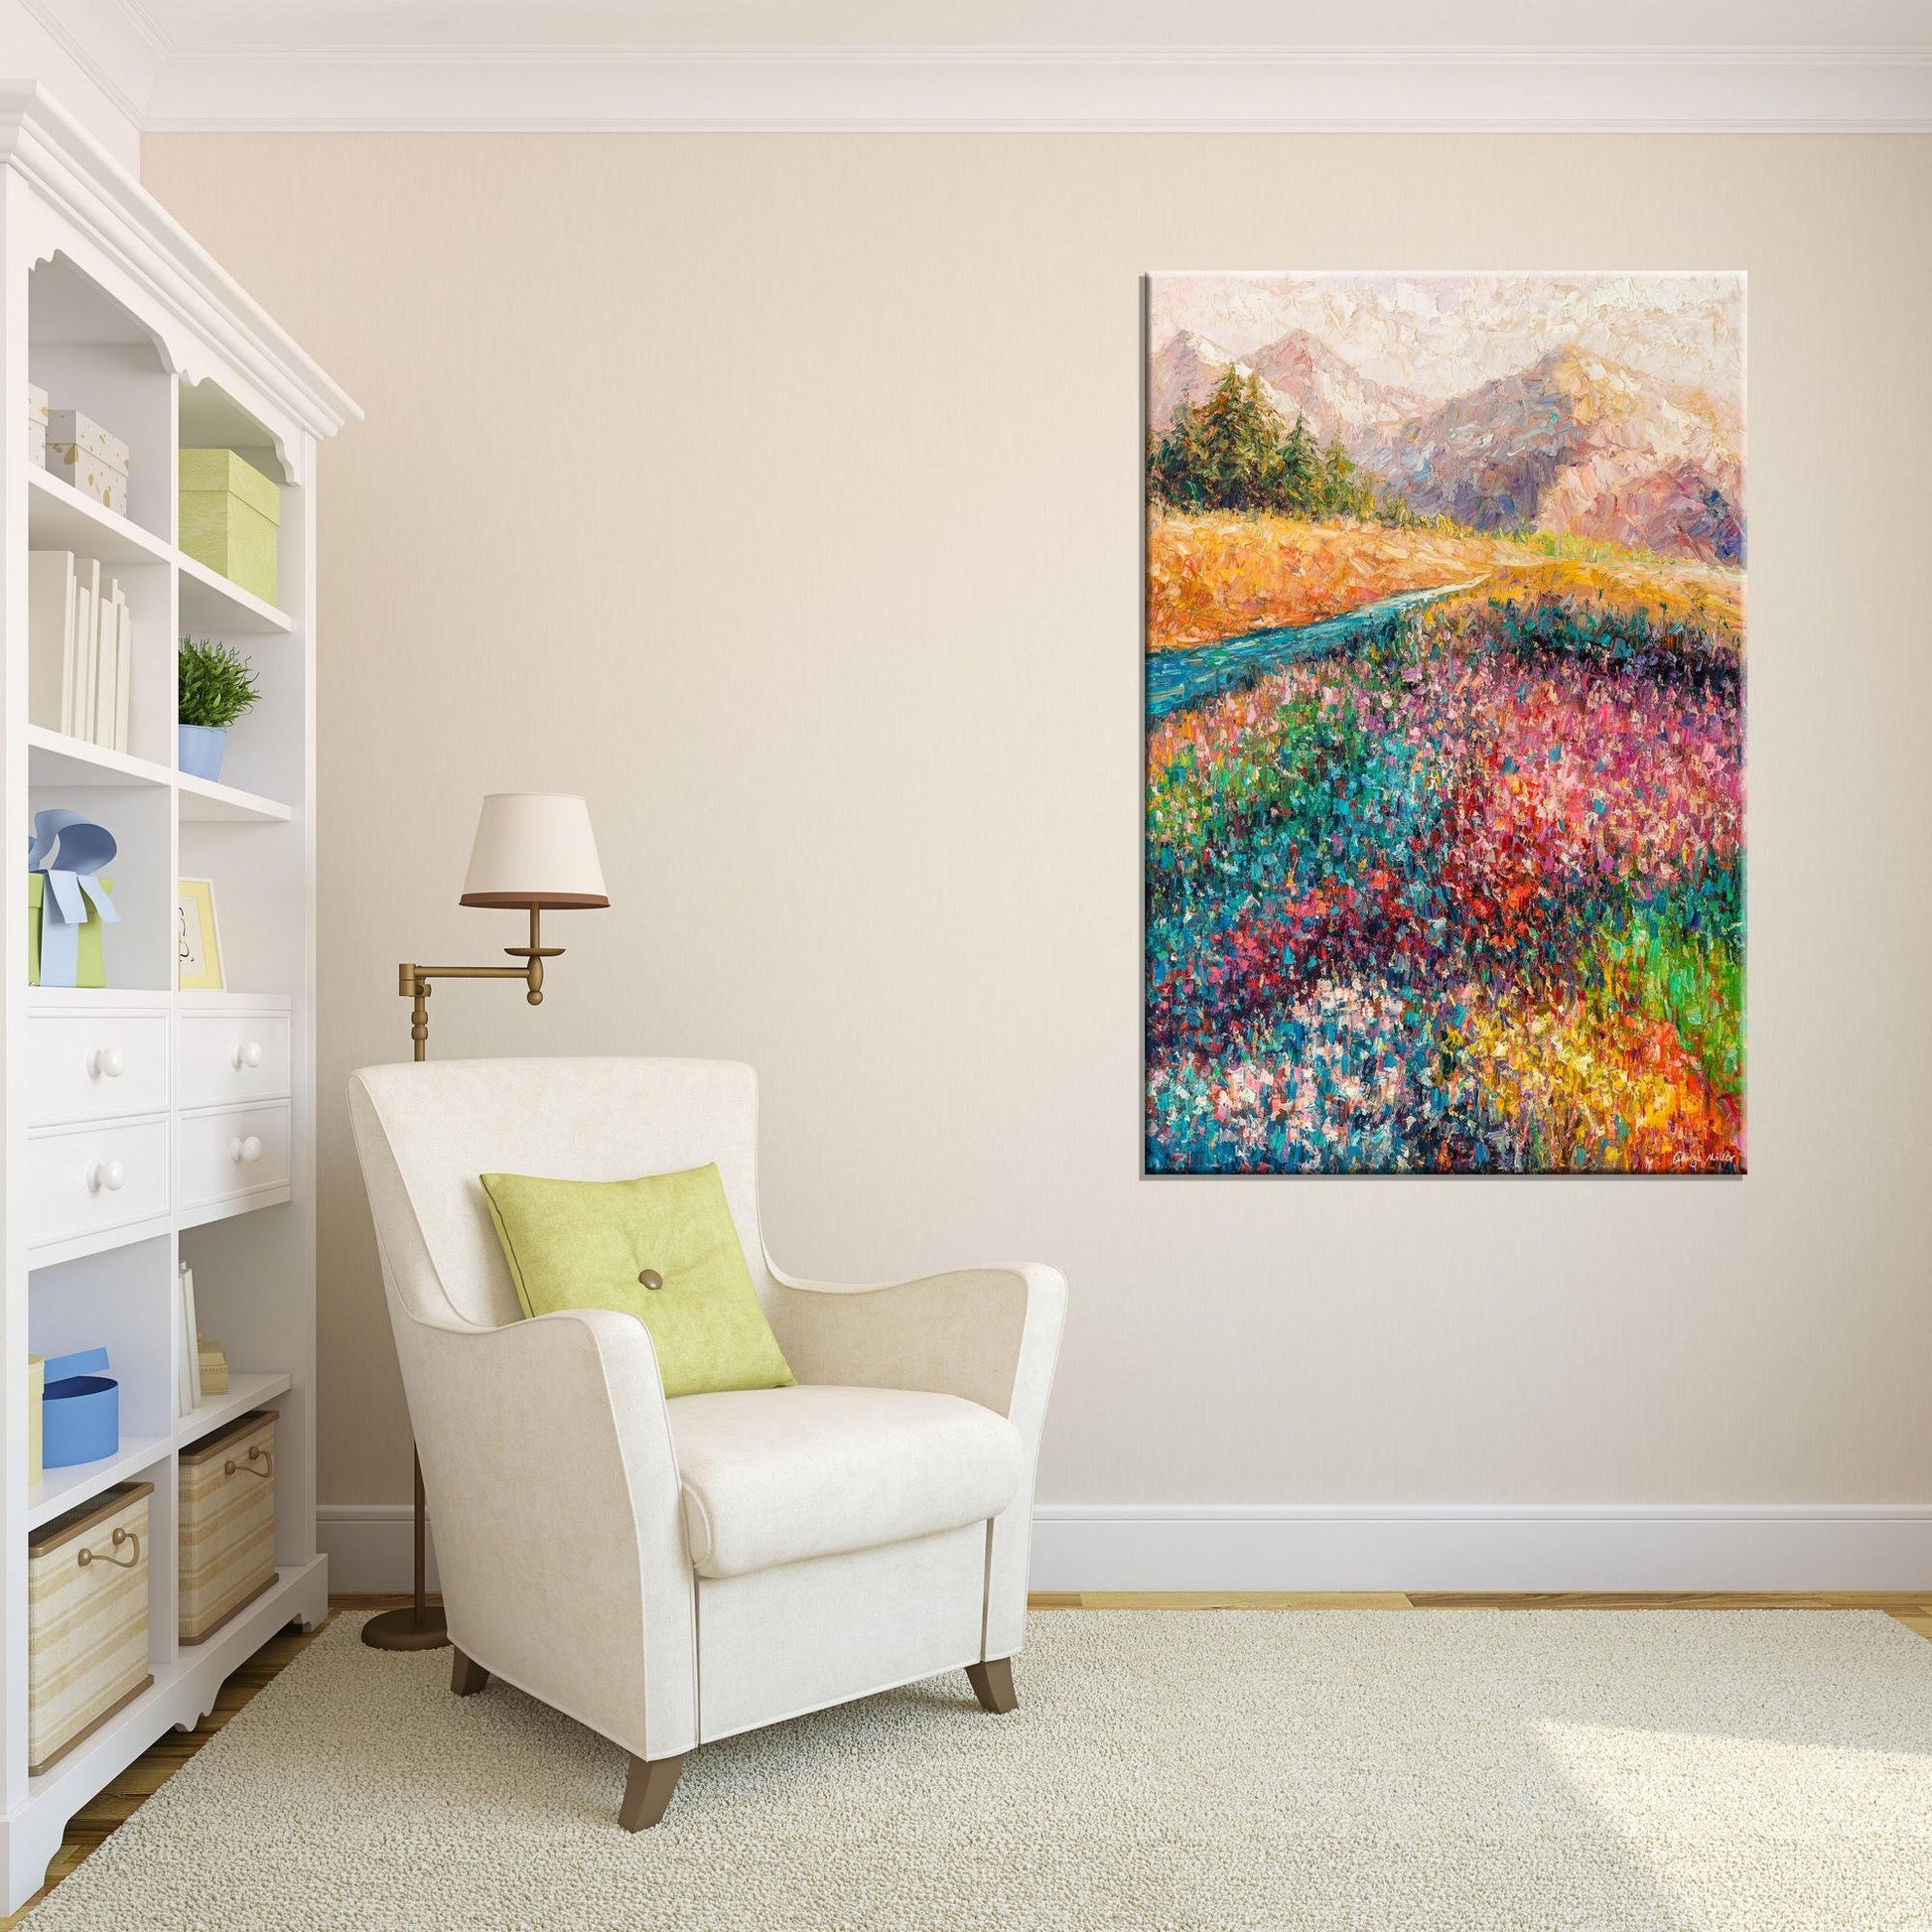 Add Life to Your Walls with this George Miller Original Oil Painting of Mountains with Wildflowers - Oversized 32x48-Inch Wall Art